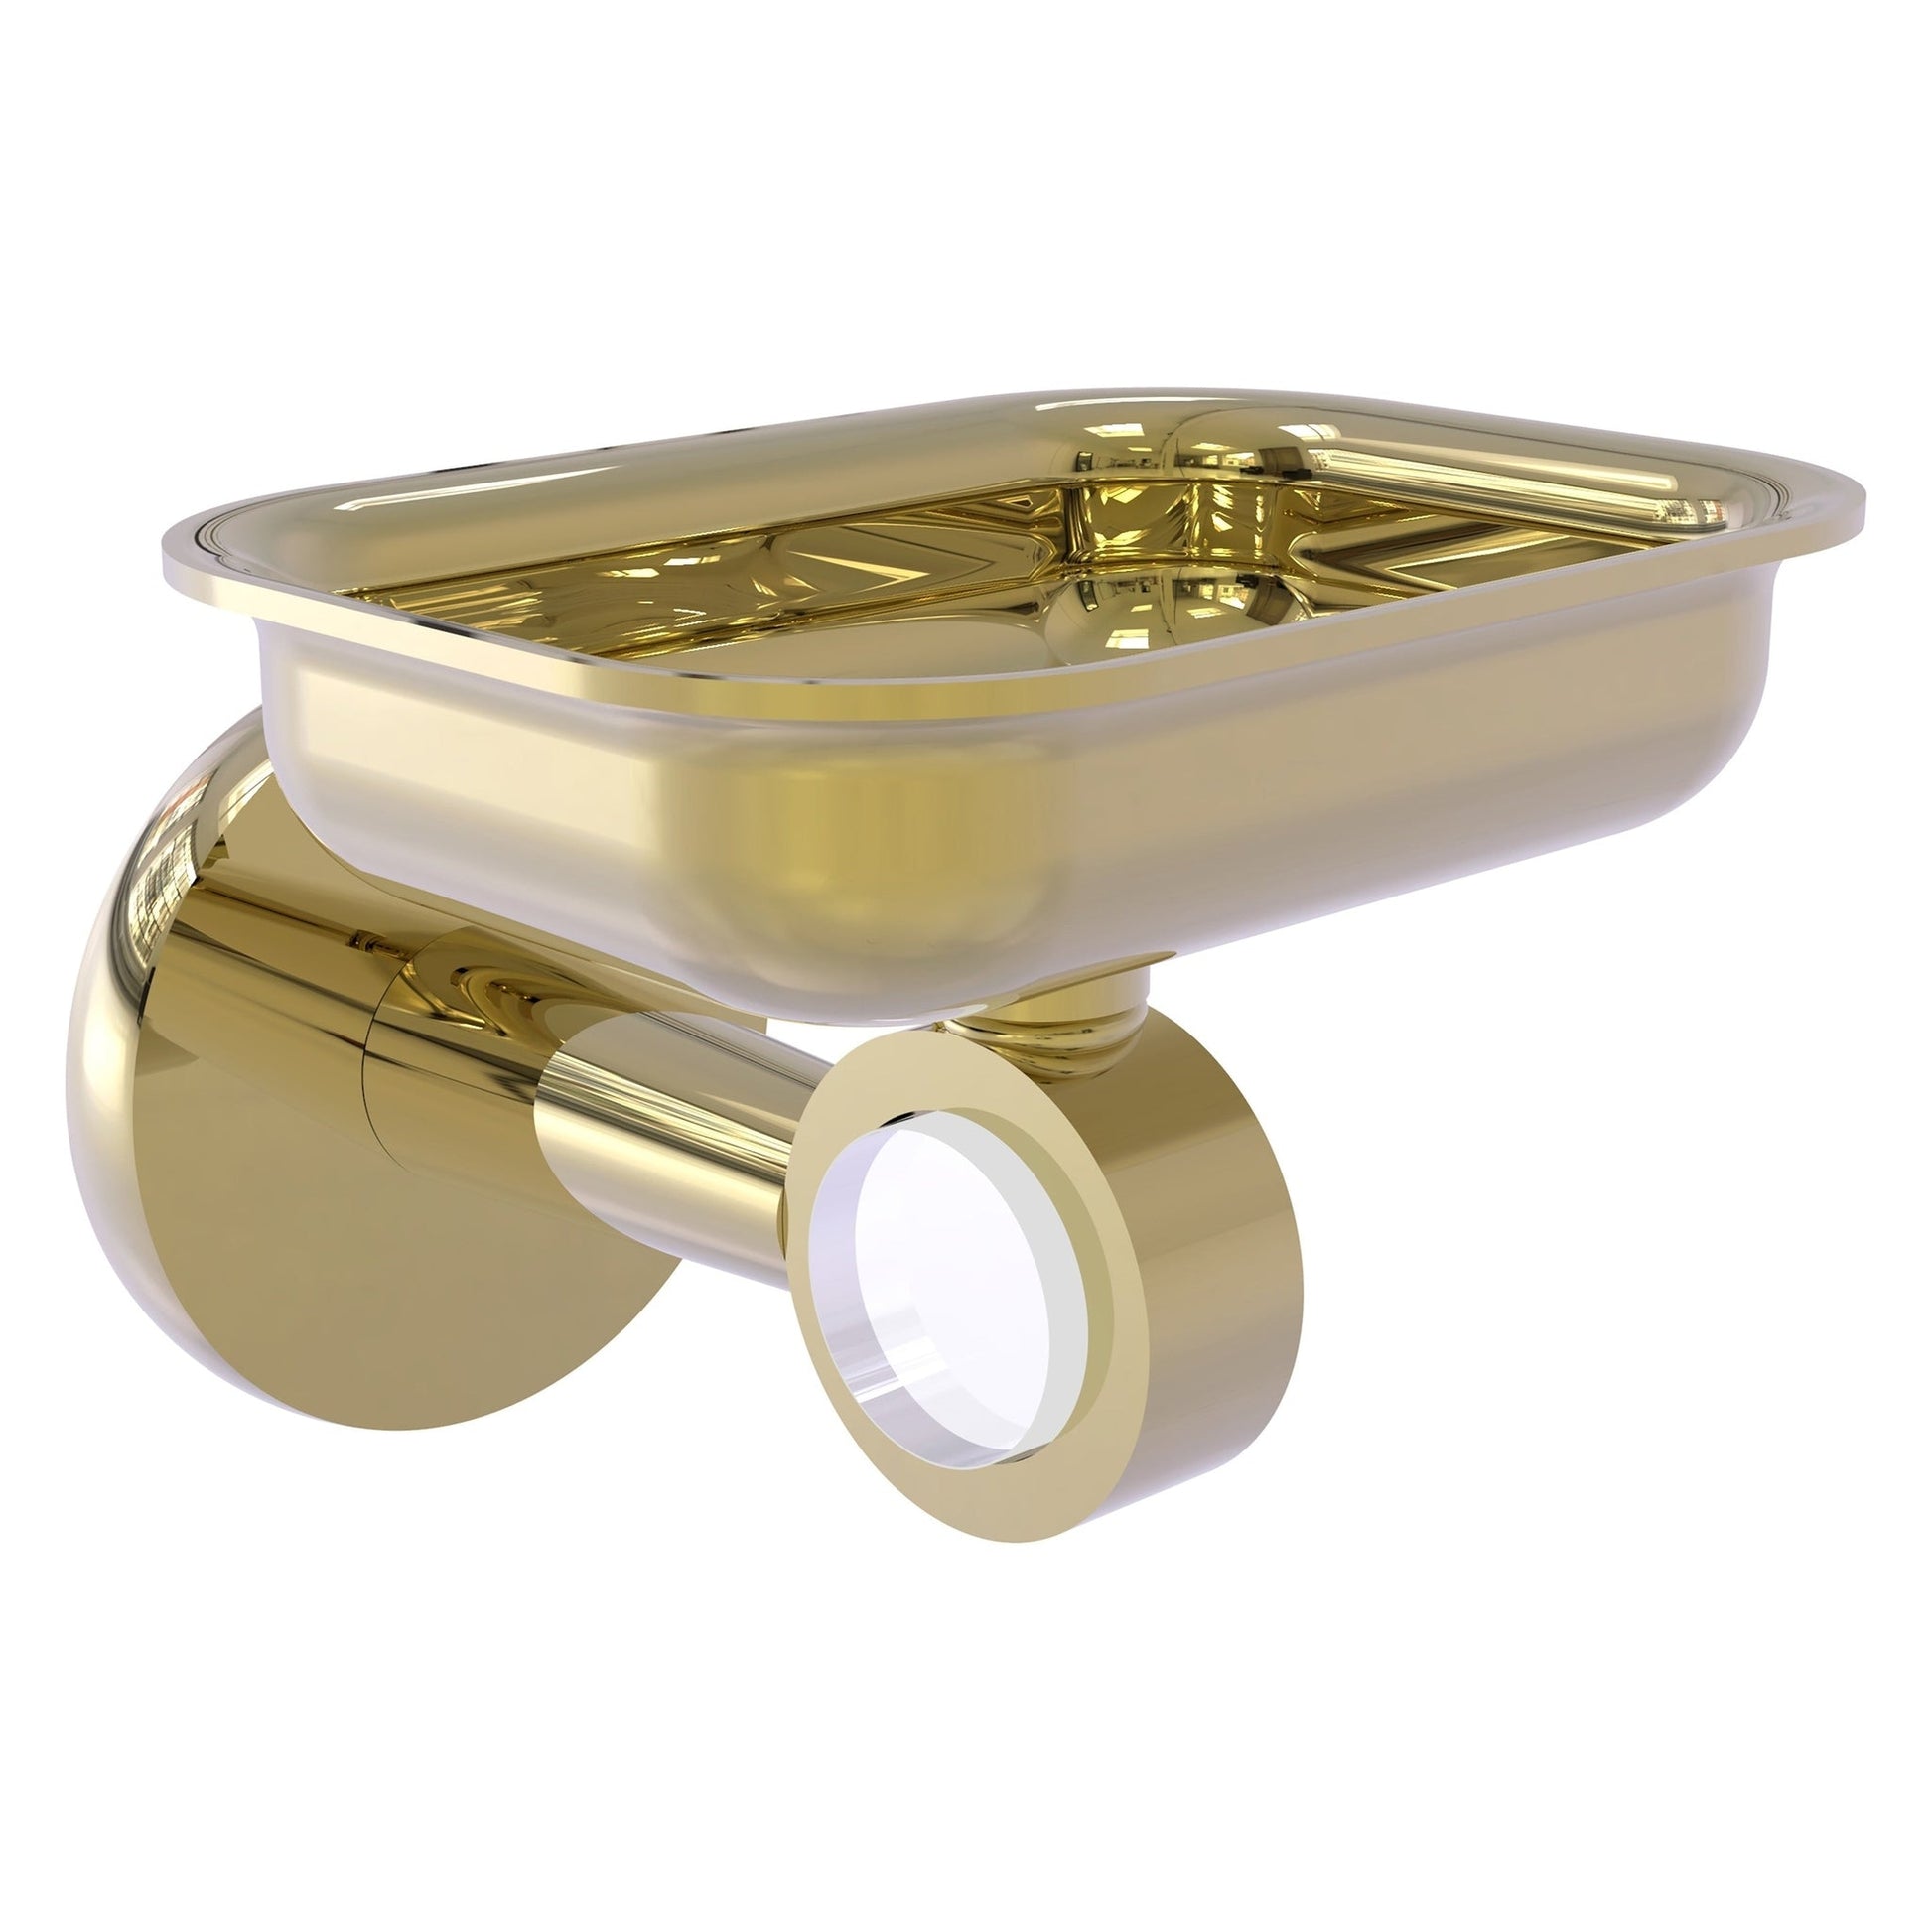 Allied Brass Clearview 4.4" x 3.6" Unlacquered Brass Solid Brass Wall-Mounted Soap Dish Holder